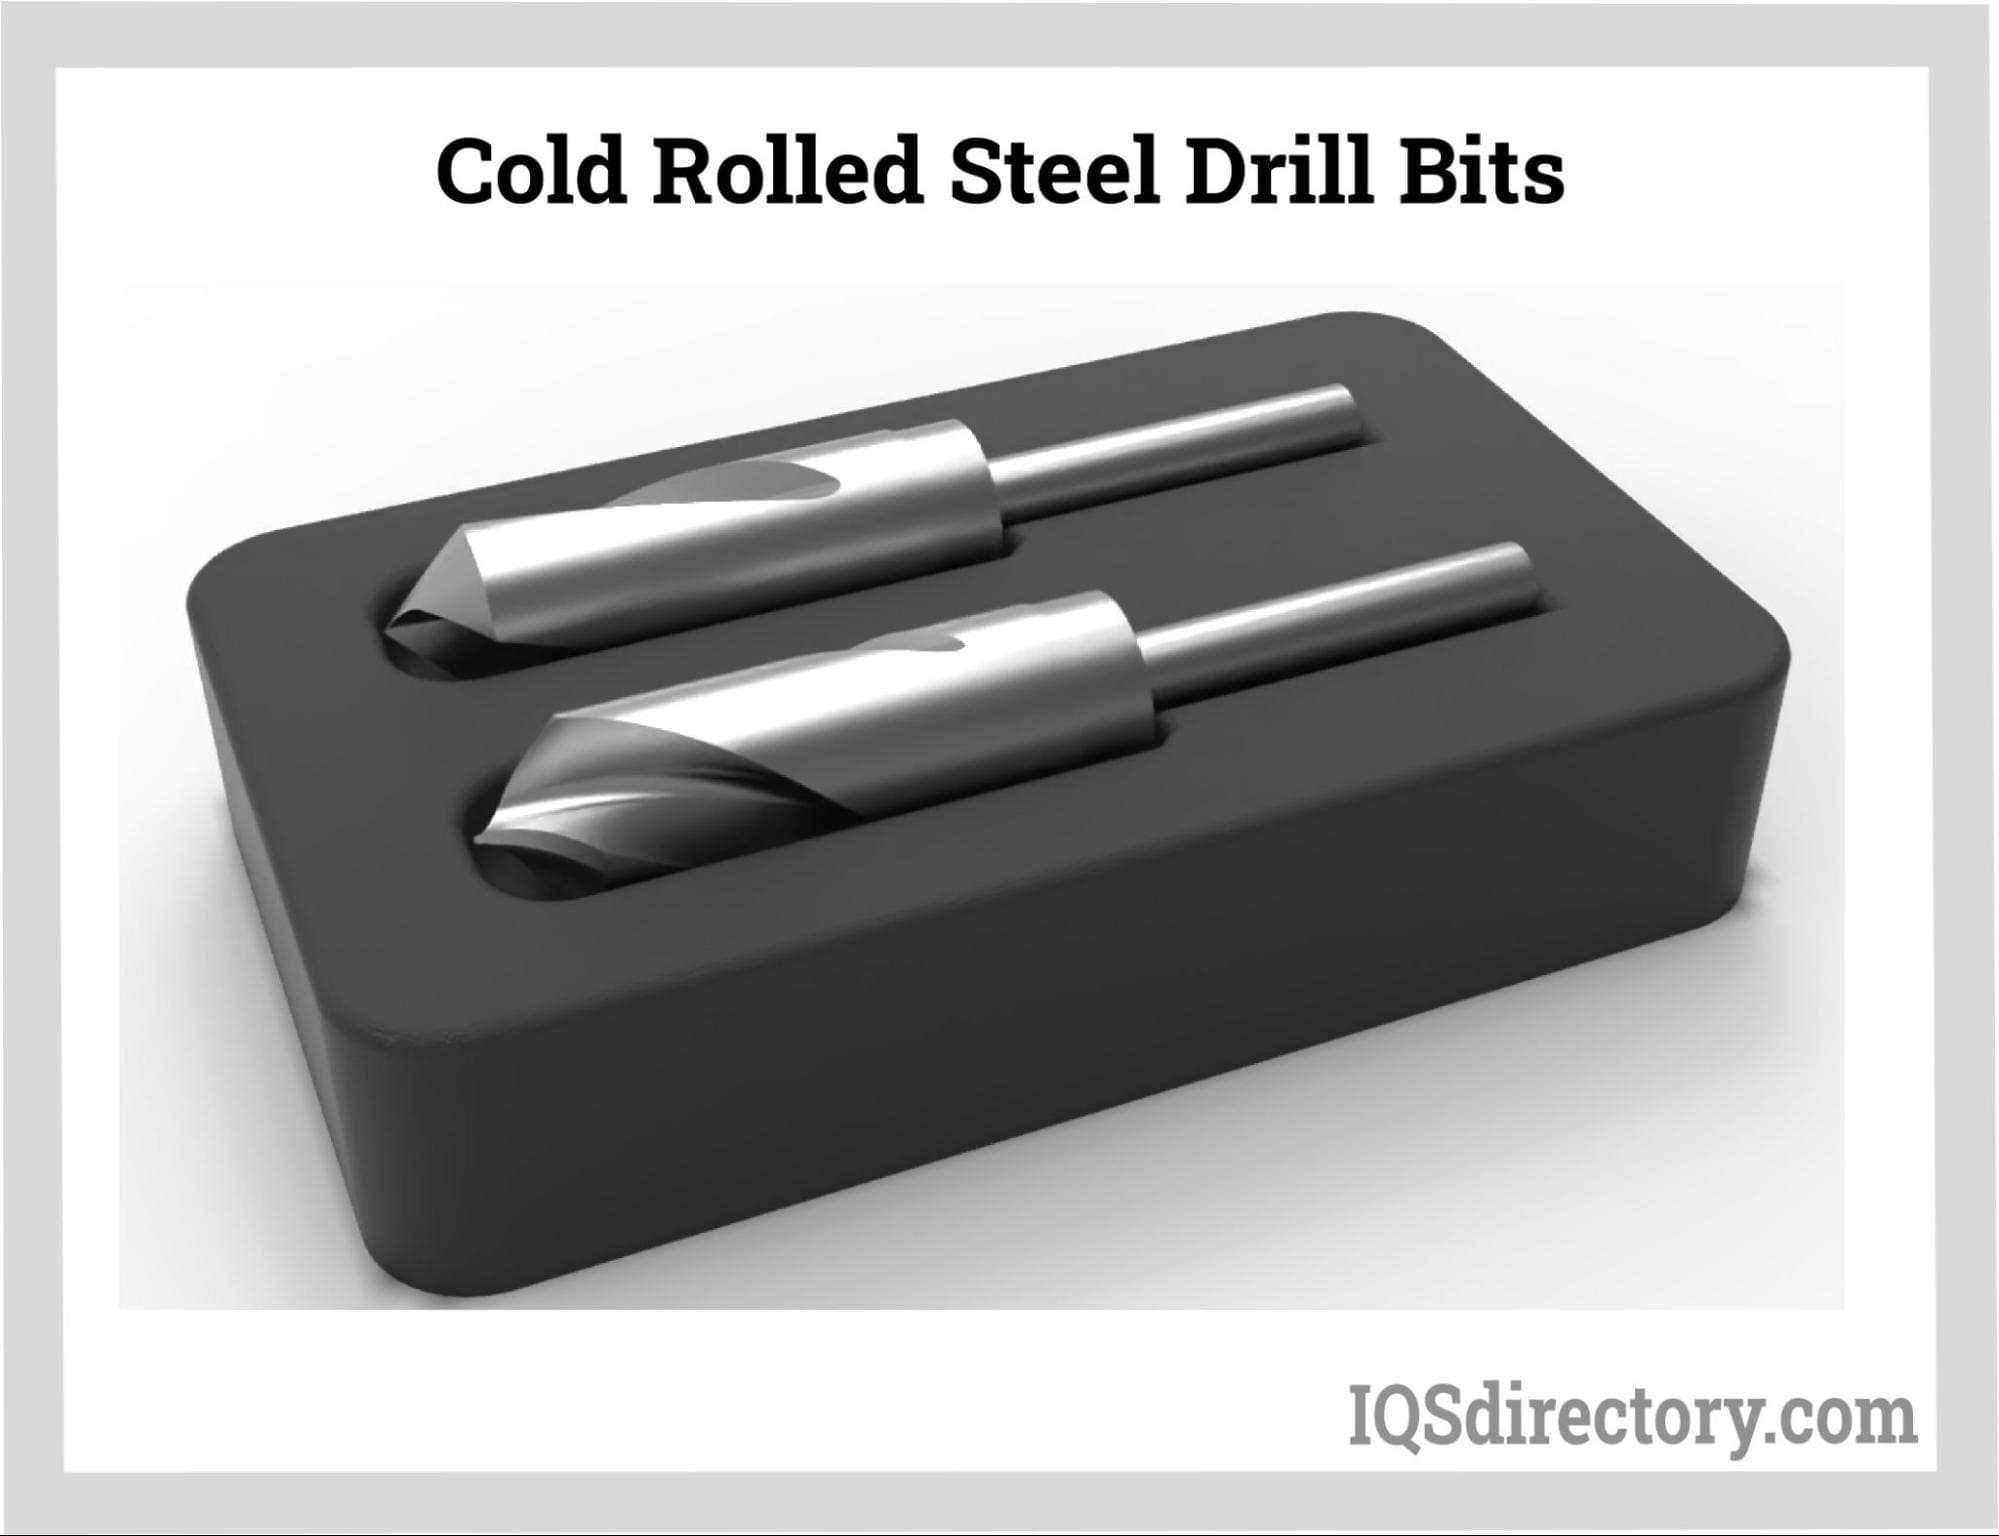 Cold Rolled Steel Drill Bits